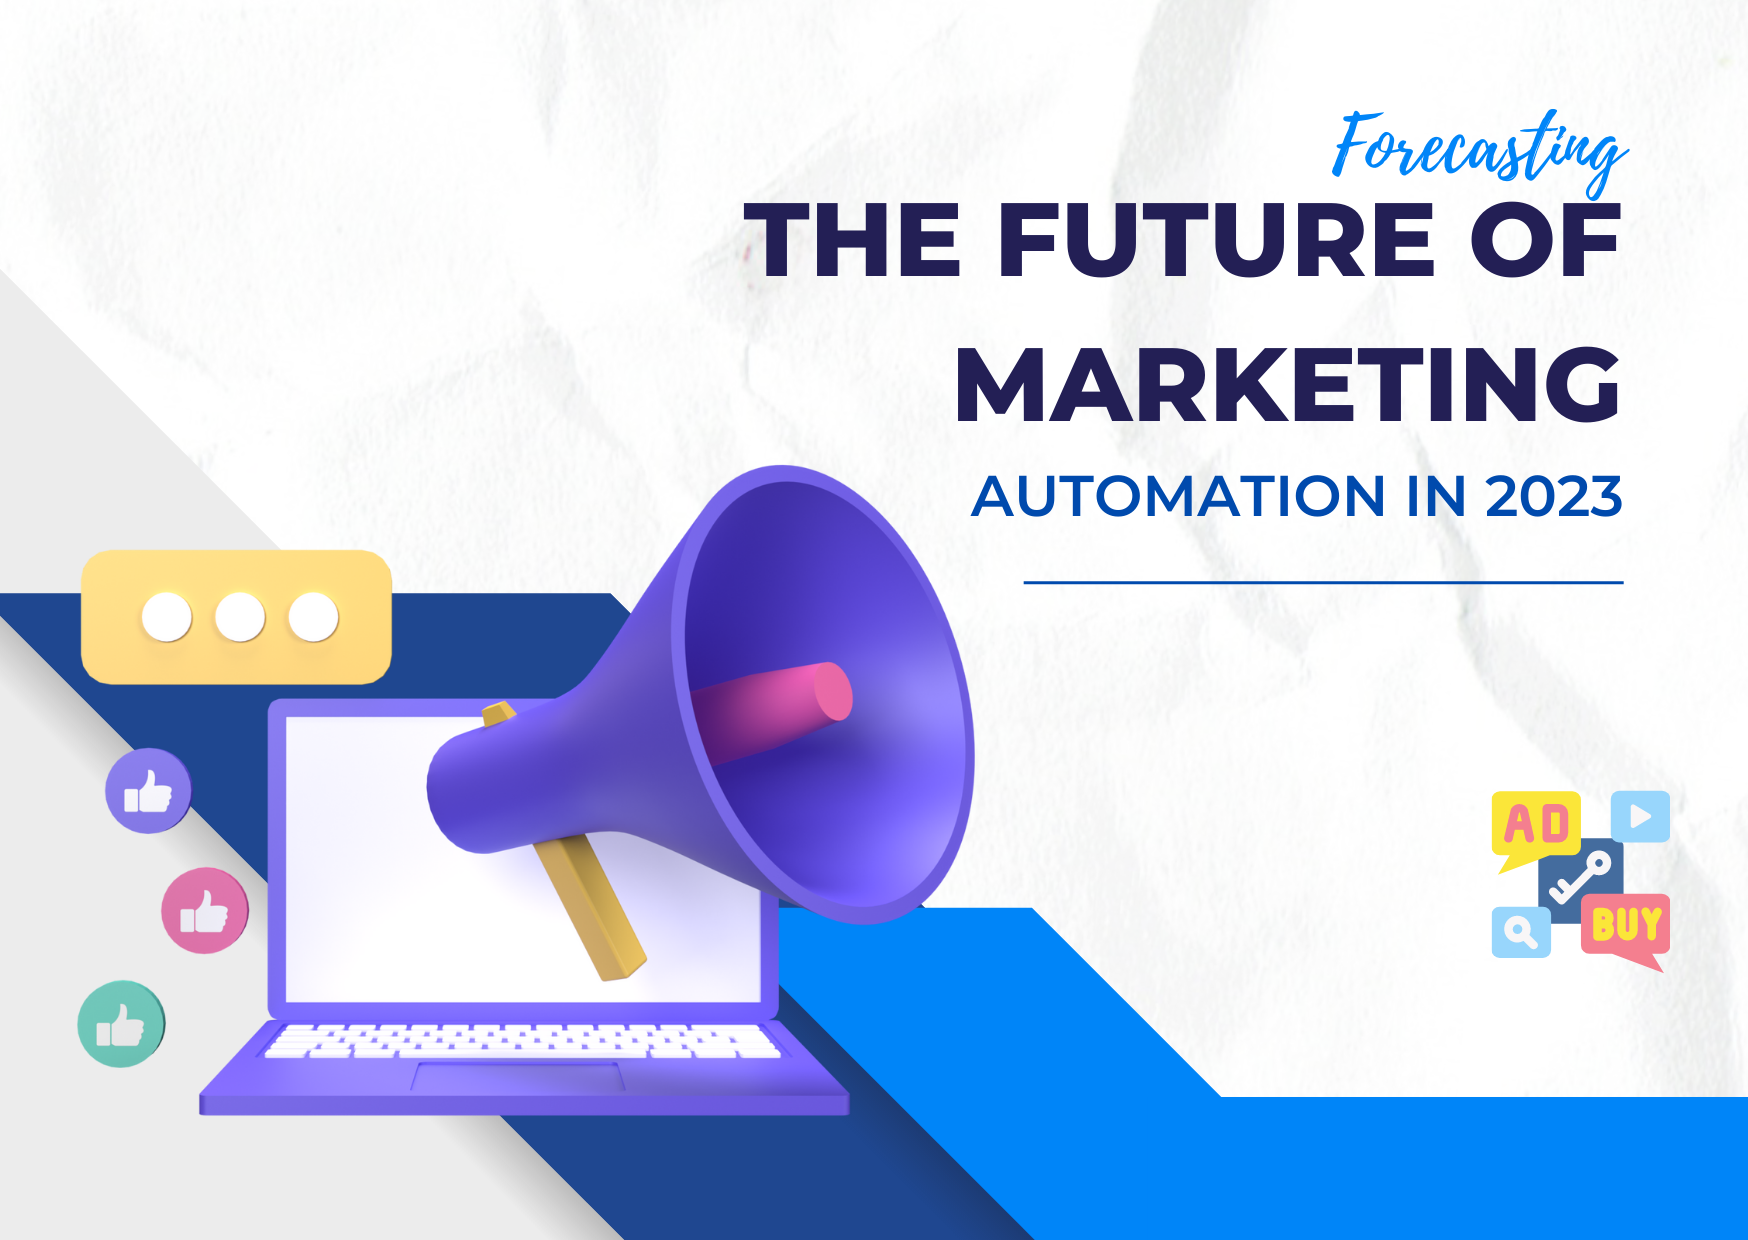 The Future of Marketing Automation in 2023